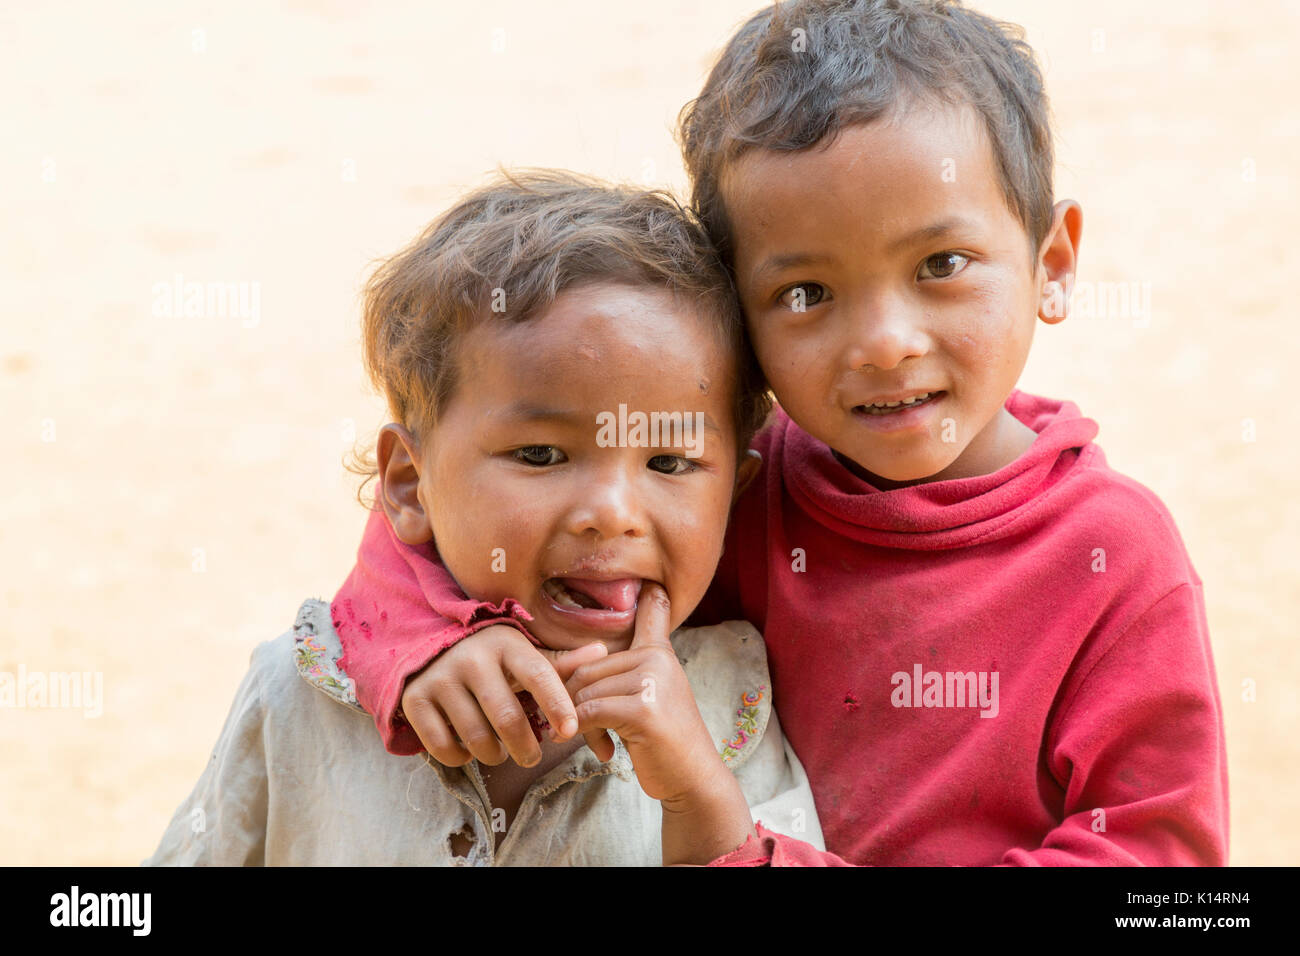 Two dirty children from Sielkan in a remote area of Meghalaya, India Stock Photo